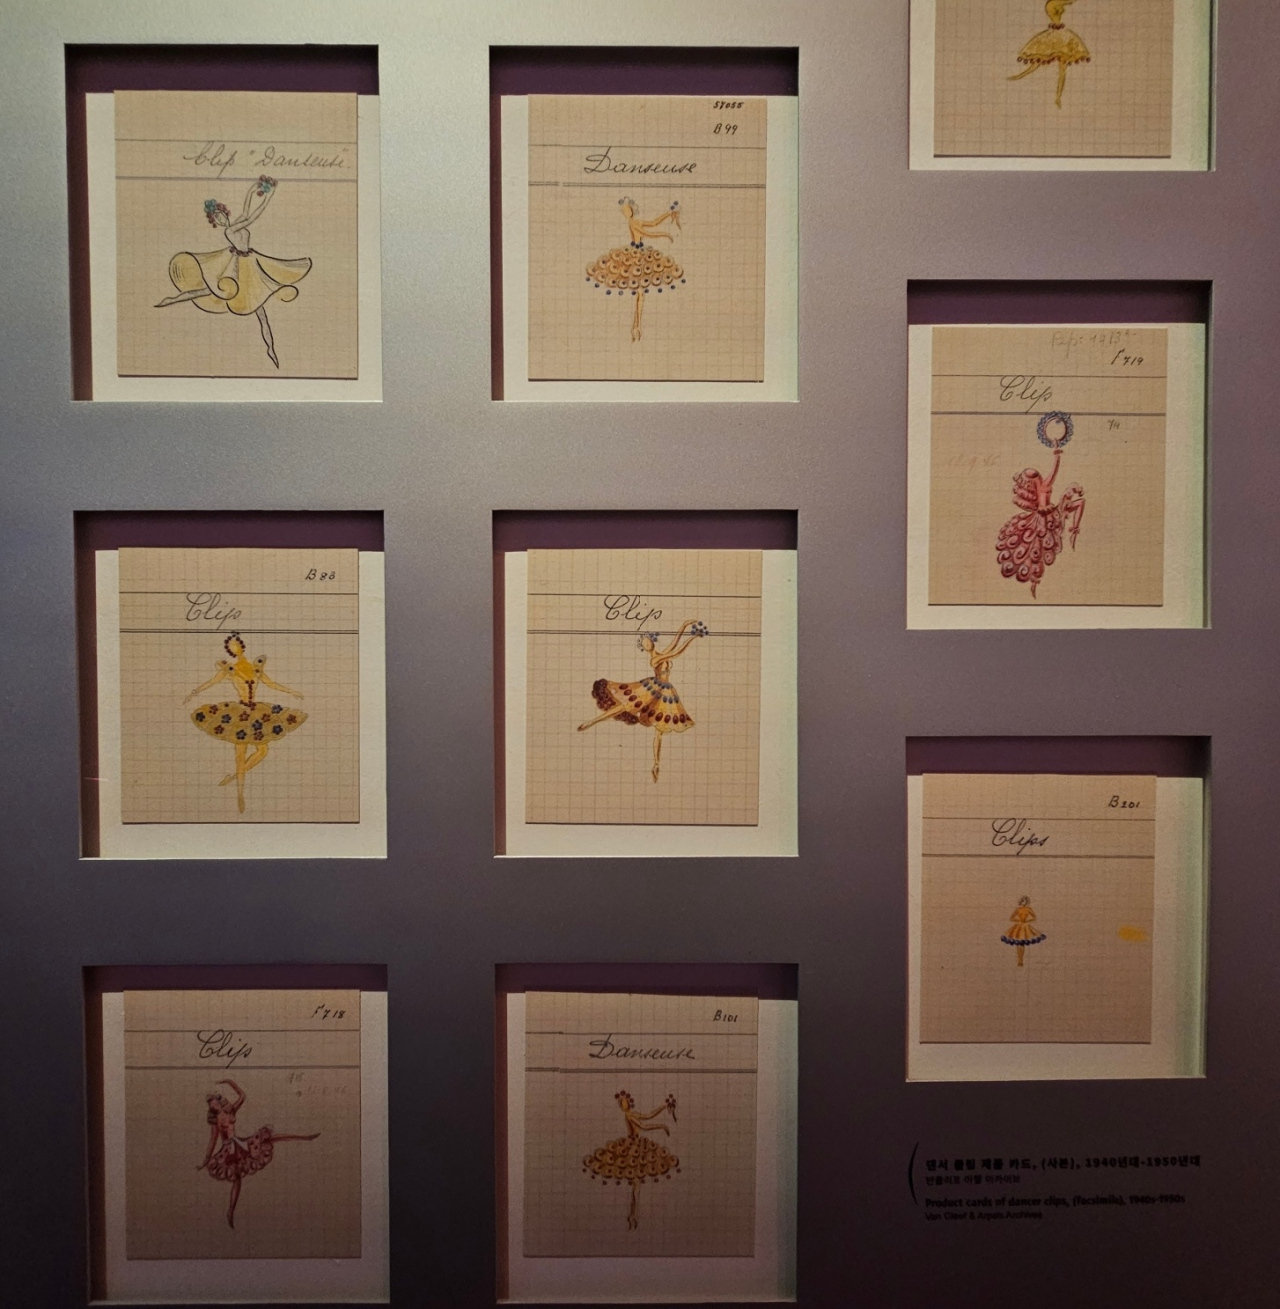 Product cards of dancer clips from the 1940s to 1950s are shown at “Van Cleef & Arpels: Time, Nature, Love